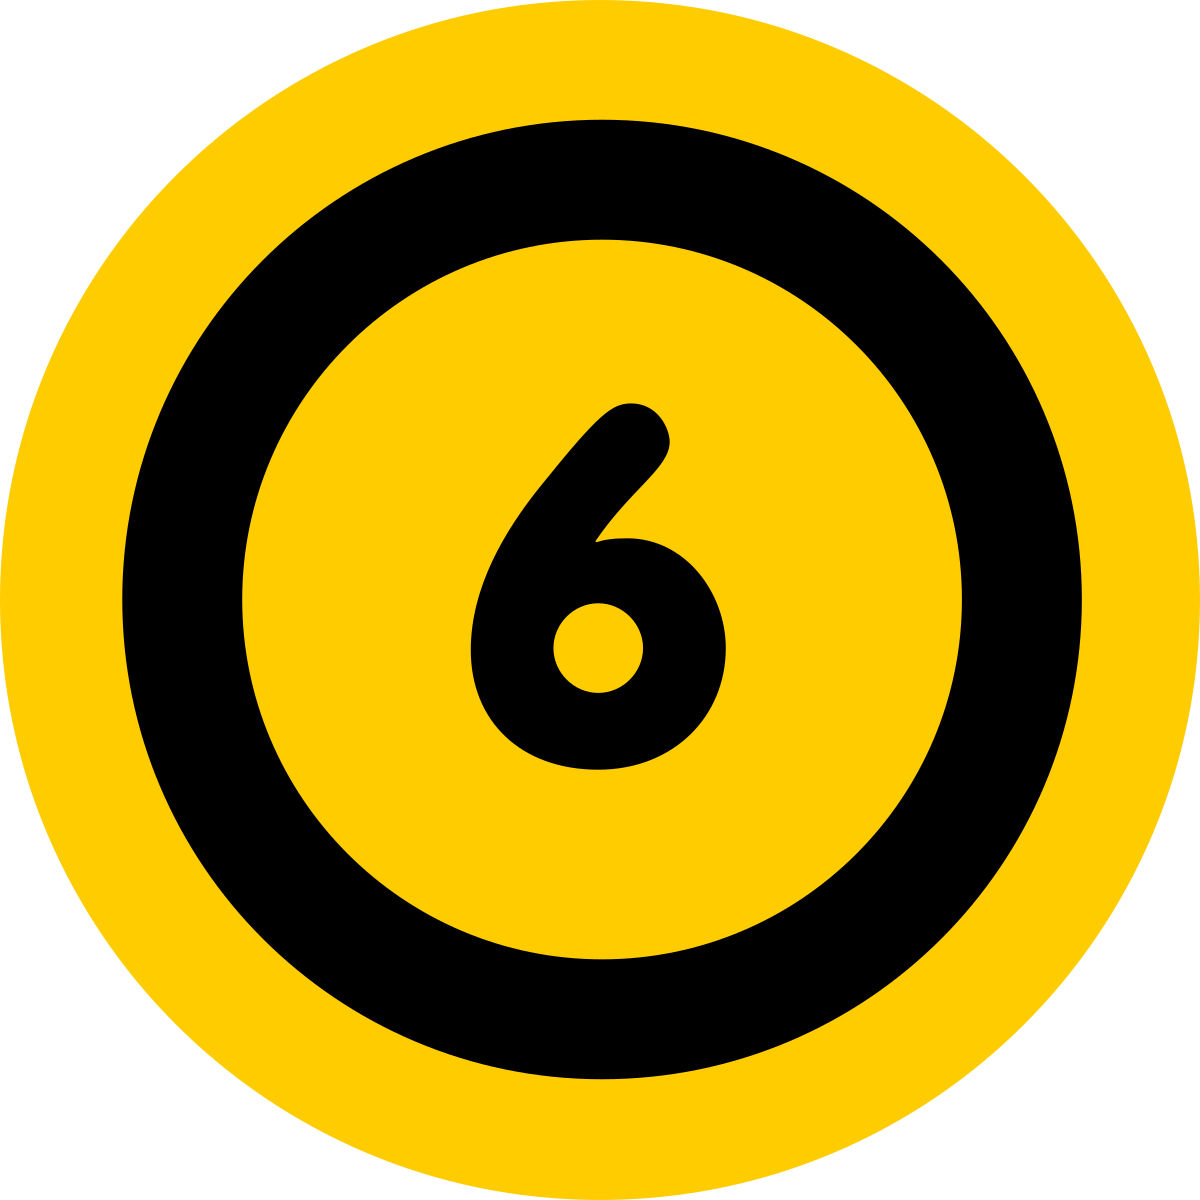 File:Serie B icon.svg - Wikimedia Commons